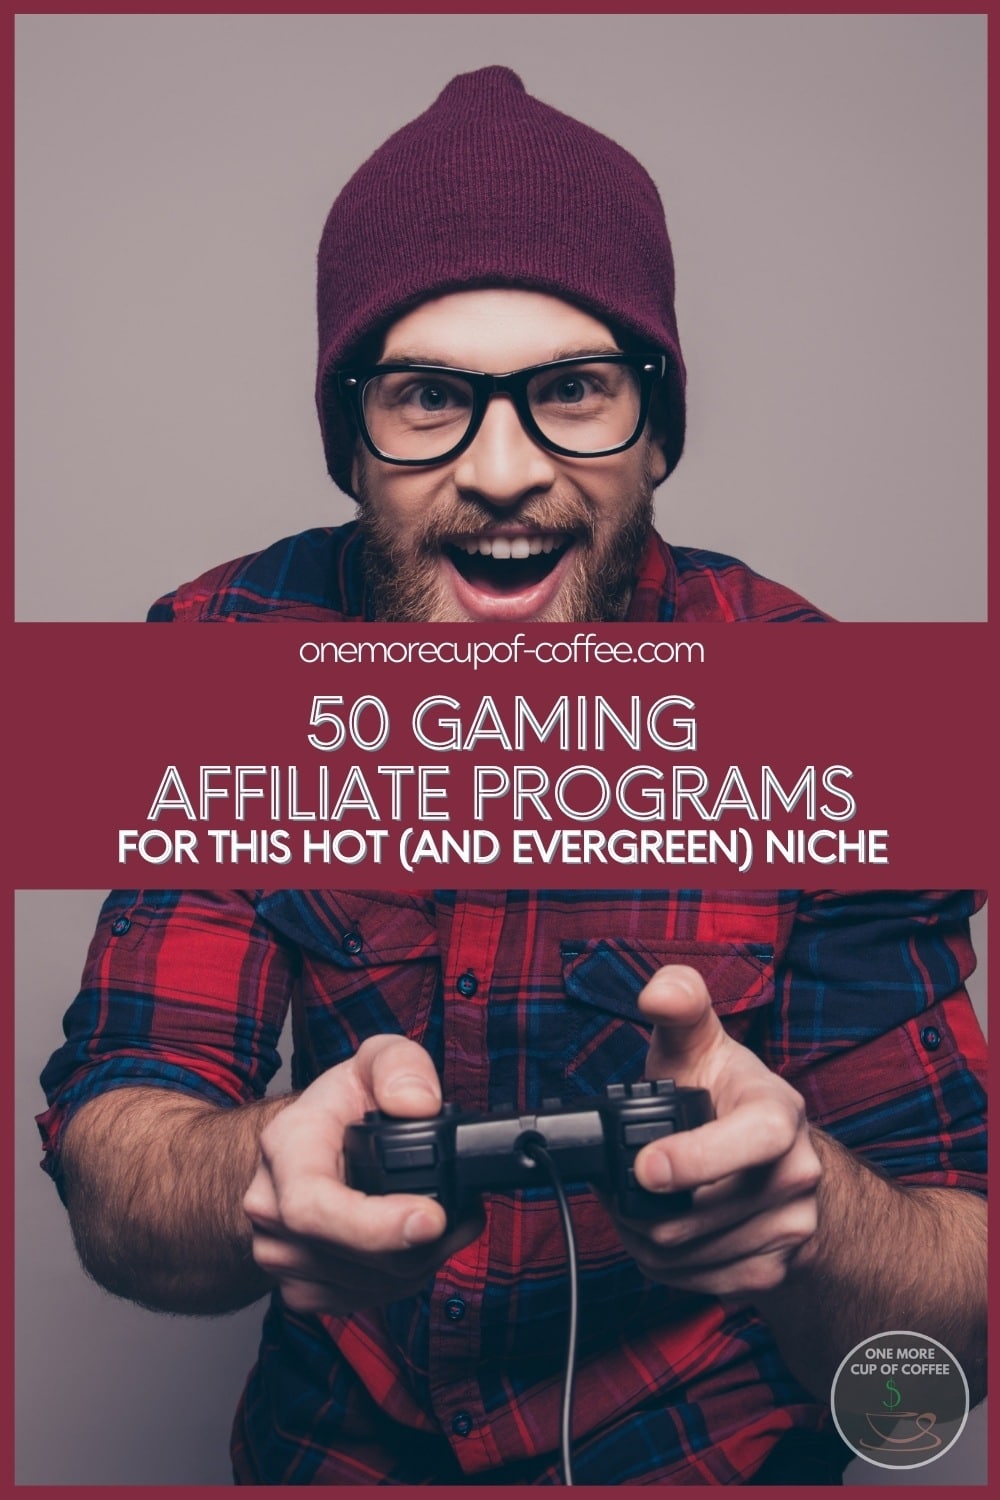 Male gamer in red plaid shirt wearing beanie, holding a gaming controller, with text overlay 